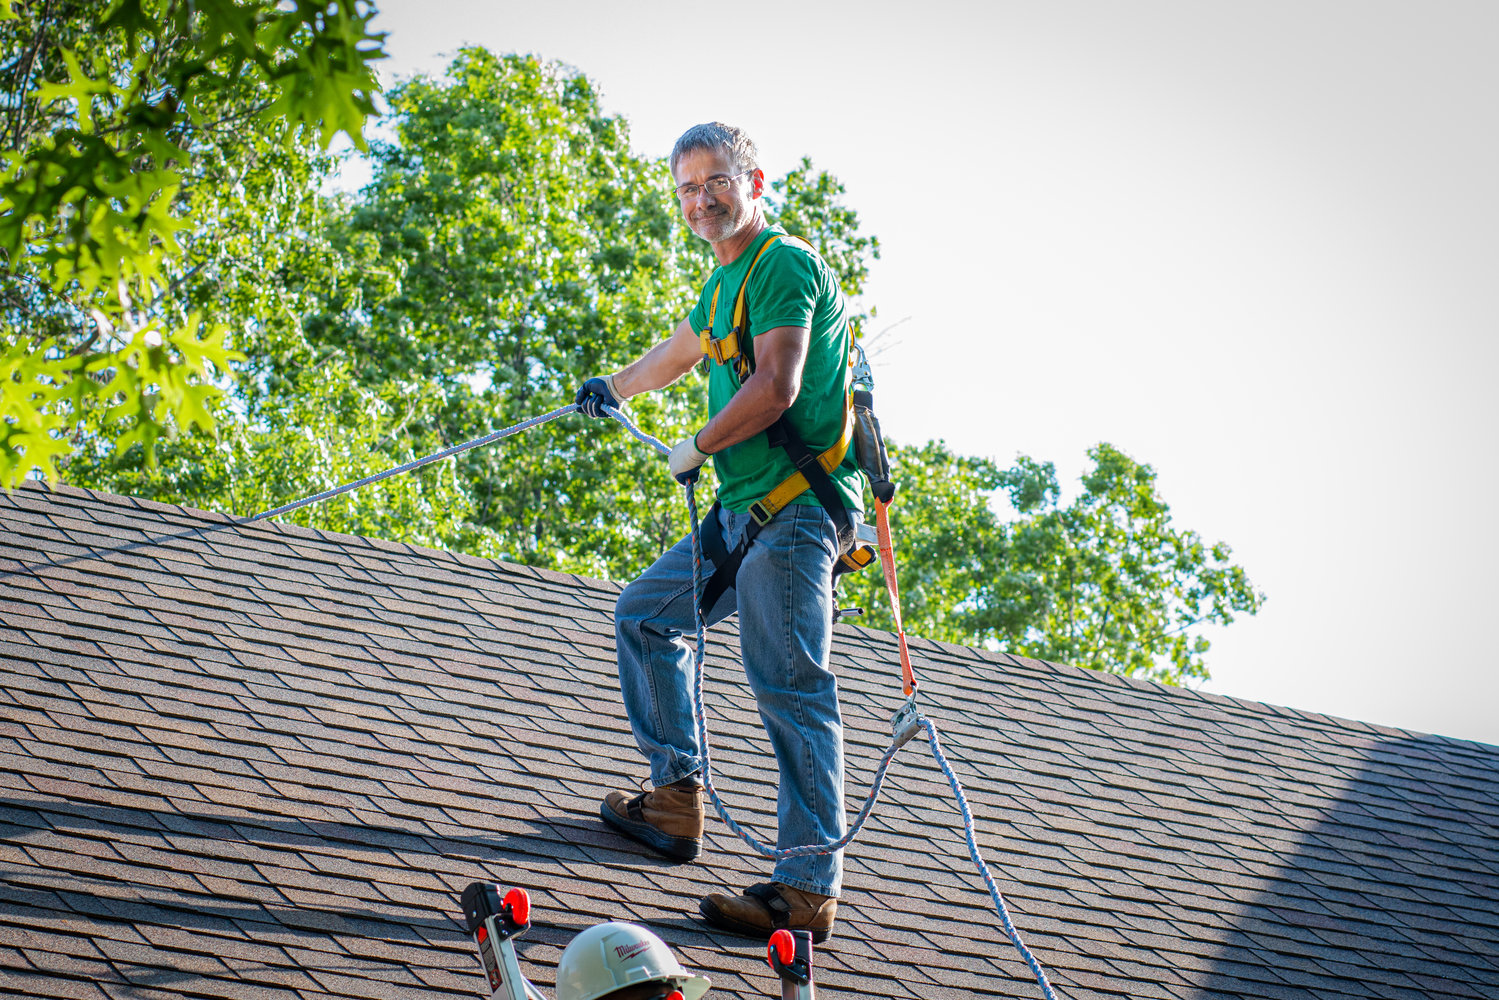 UNDER MAINTENANCE: Tom O'Connor with Solera Energy ascends the roof of a customer's home for a solar panel maintenance check.